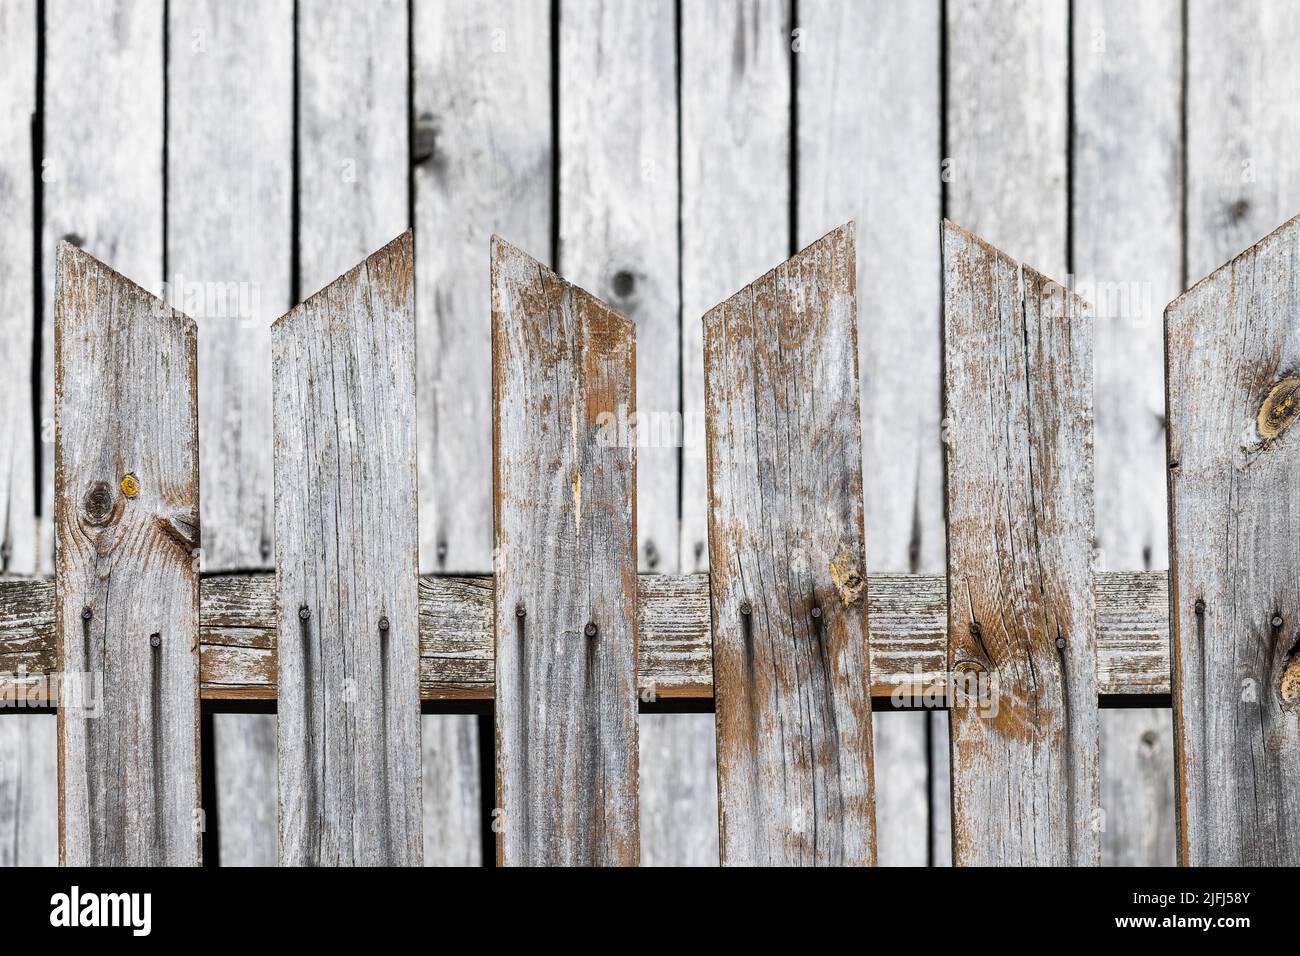 Wood fence from pointed boards with pale wooden building wall in blurred background. Closeup of weathered safety fencing with gaps between brown plank. Stock Photo